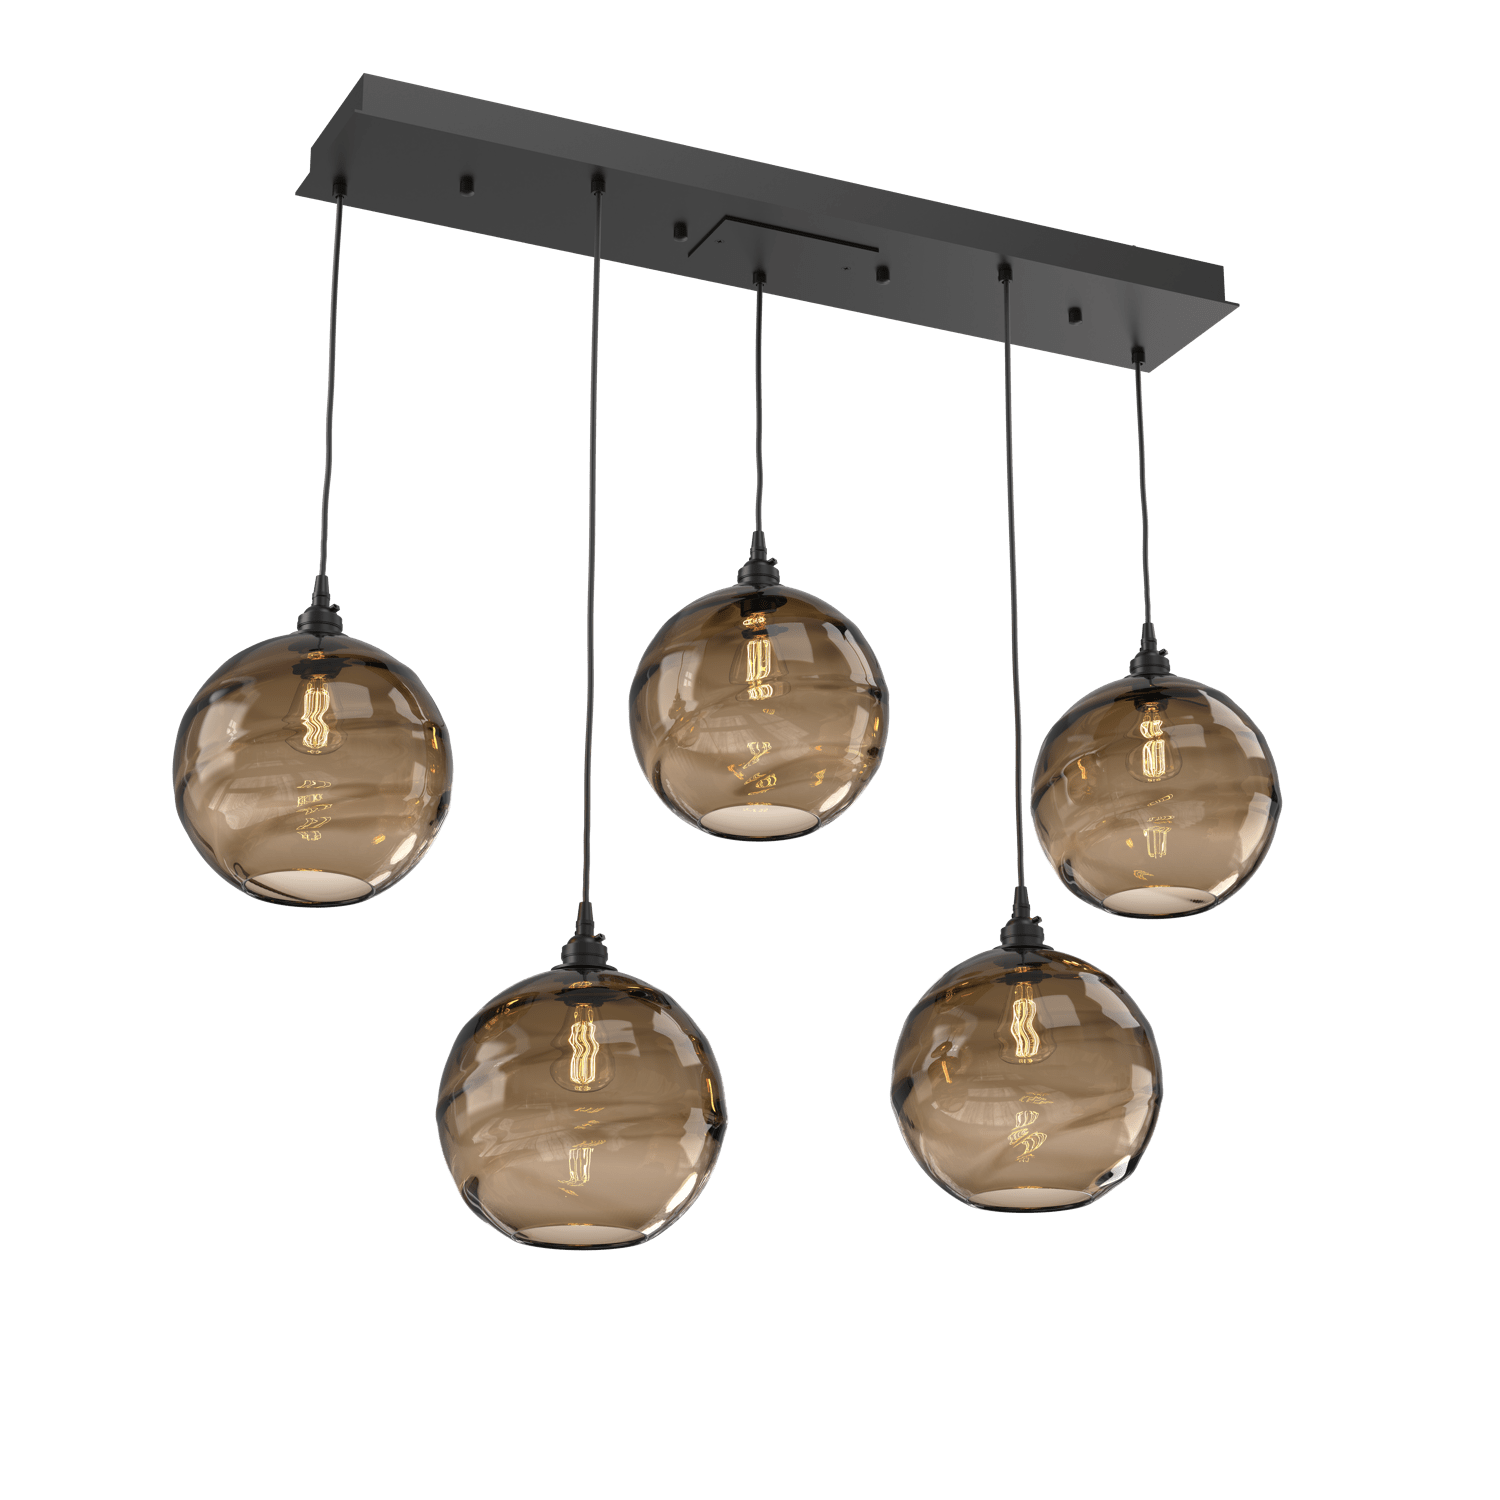 PLB0047-05-MB-OB-Hammerton-Studio-Optic-Blown-Glass-Terra-5-light-linear-pendant-chandelier-with-matte-black-finish-and-optic-bronze-blown-glass-shades-and-incandescent-lamping